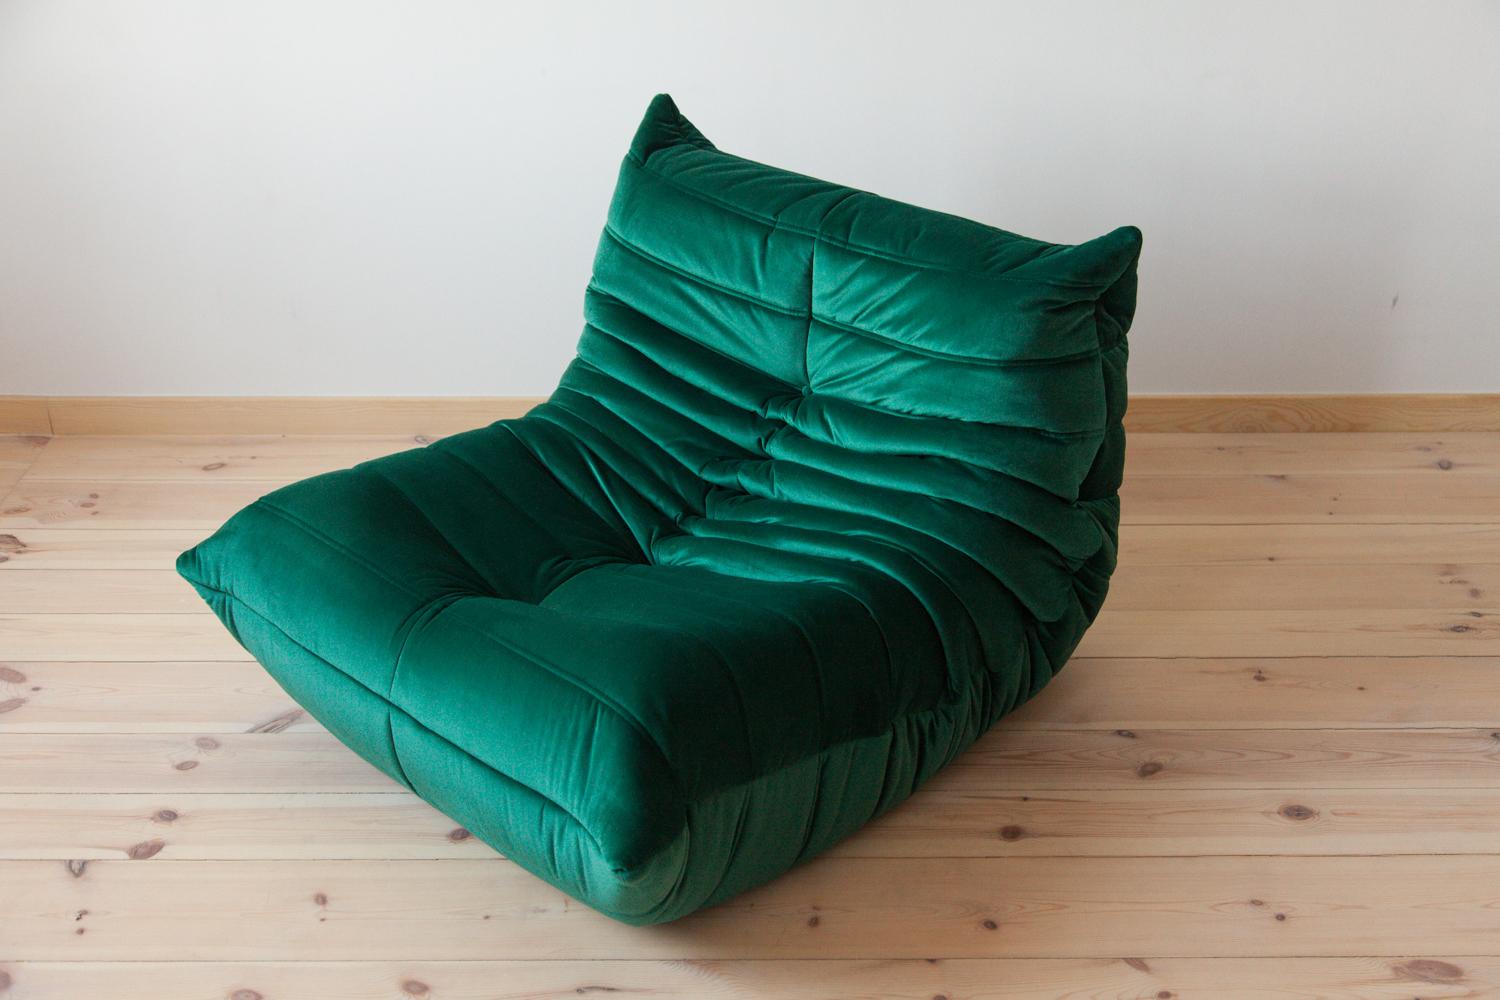 This Togo living room set was designed by Michel Ducaroy in 1973 and manufactured by Ligne Roset in France. It has been reupholstered in bottle green high quality velvet, and is made up of the following pieces, each with the original Ligne Roset